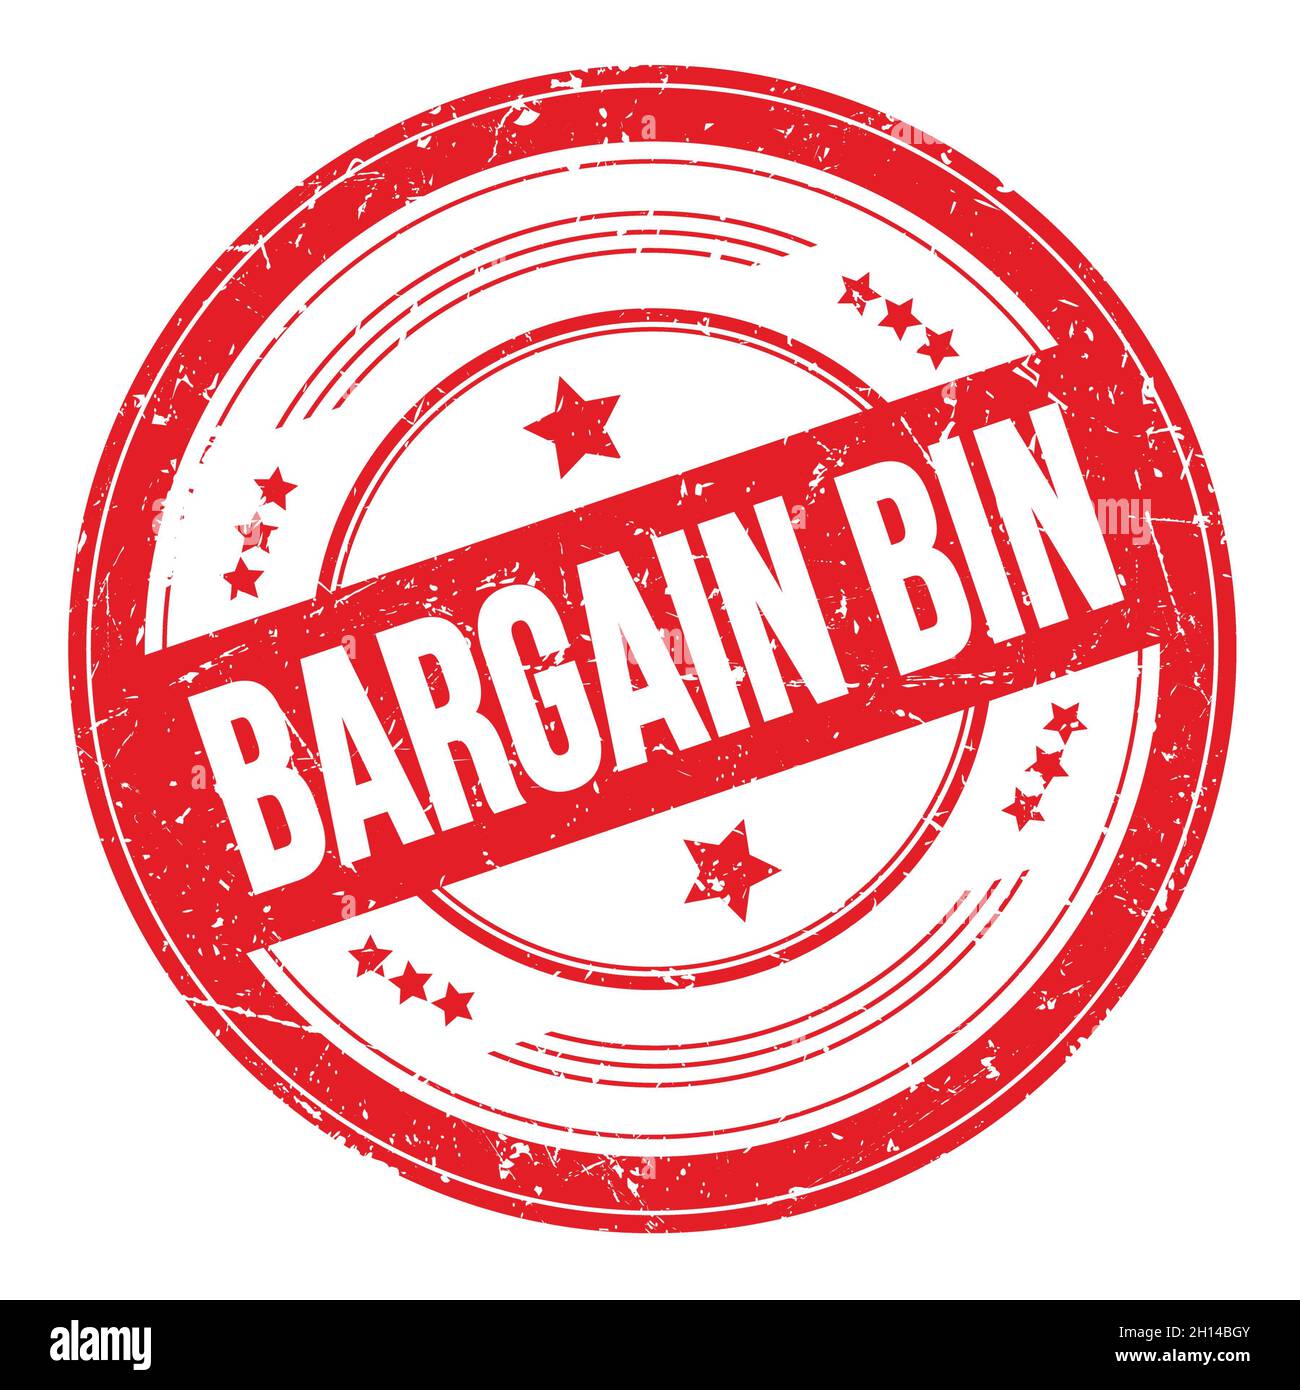 BARGAIN BIN text on red round grungy texture stamp. Stock Photo